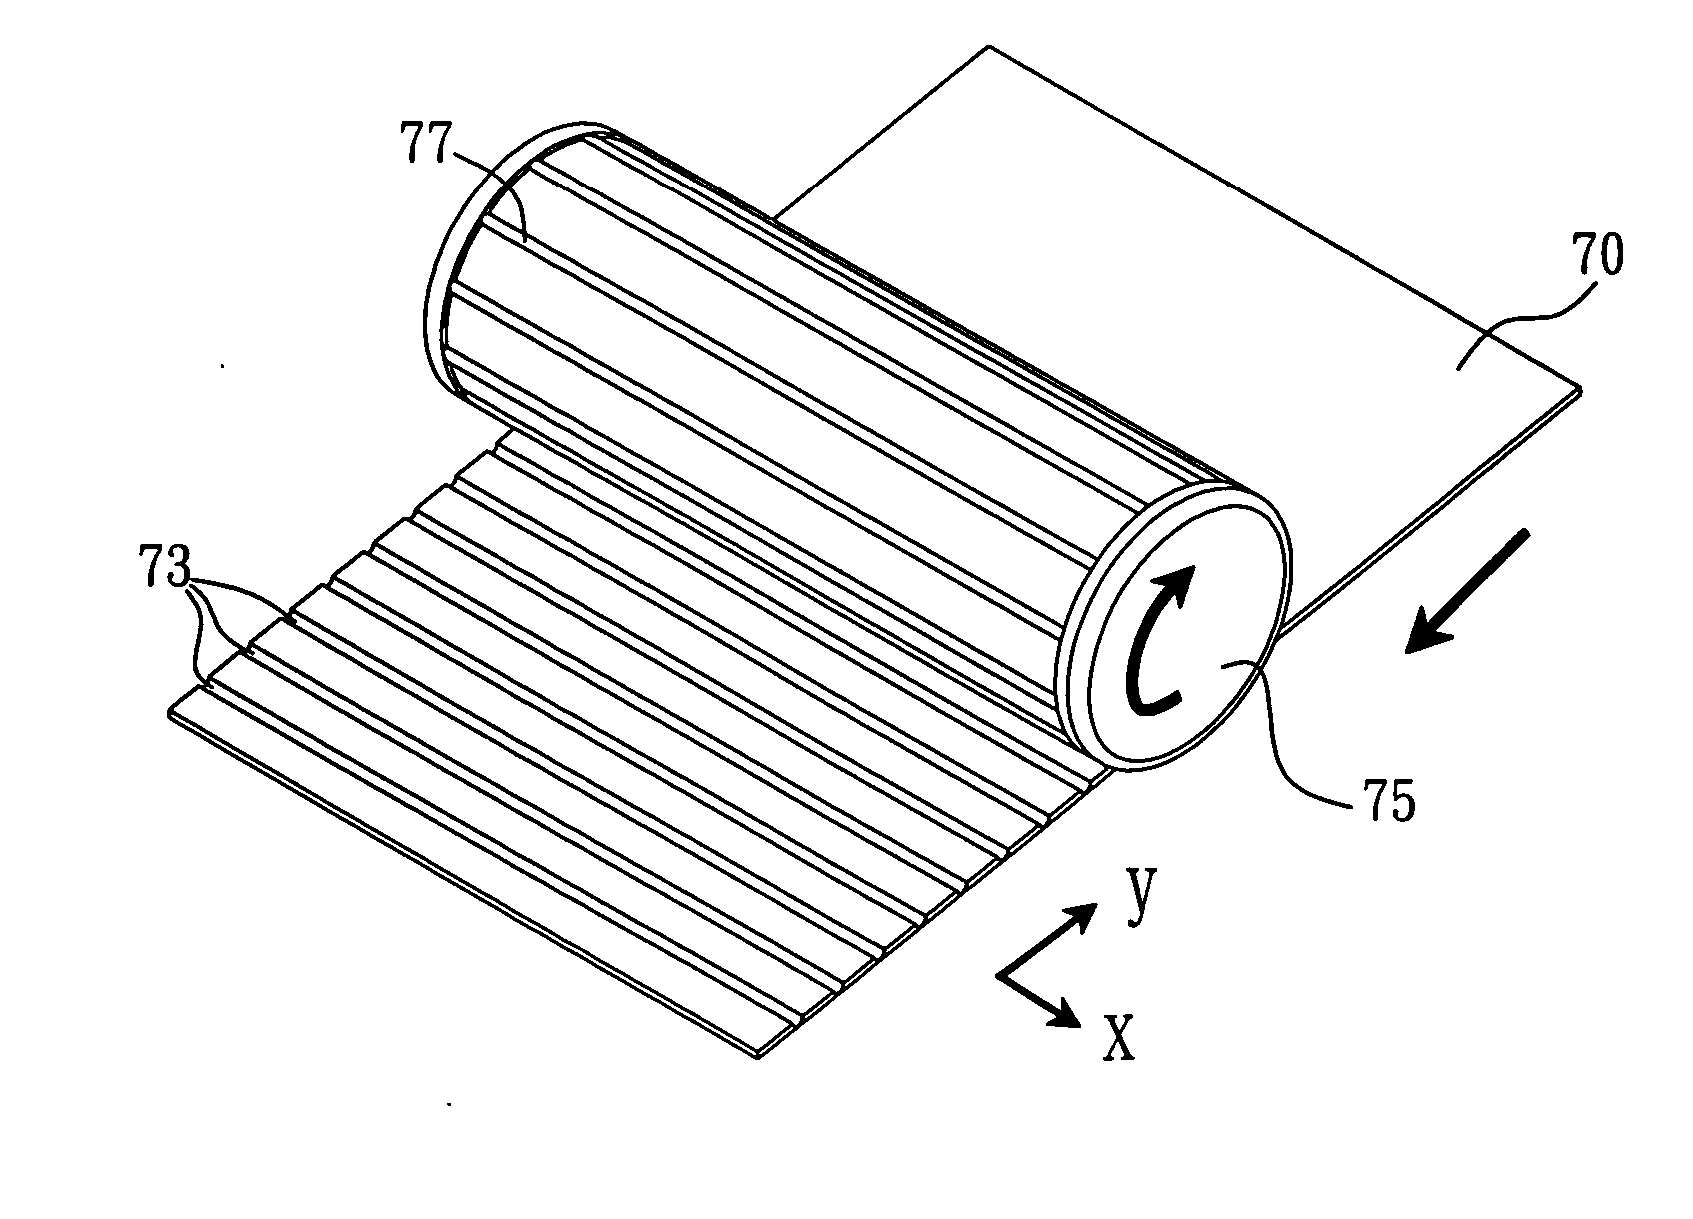 Method for making a shadow mask for an apposed discharge plasm display panel